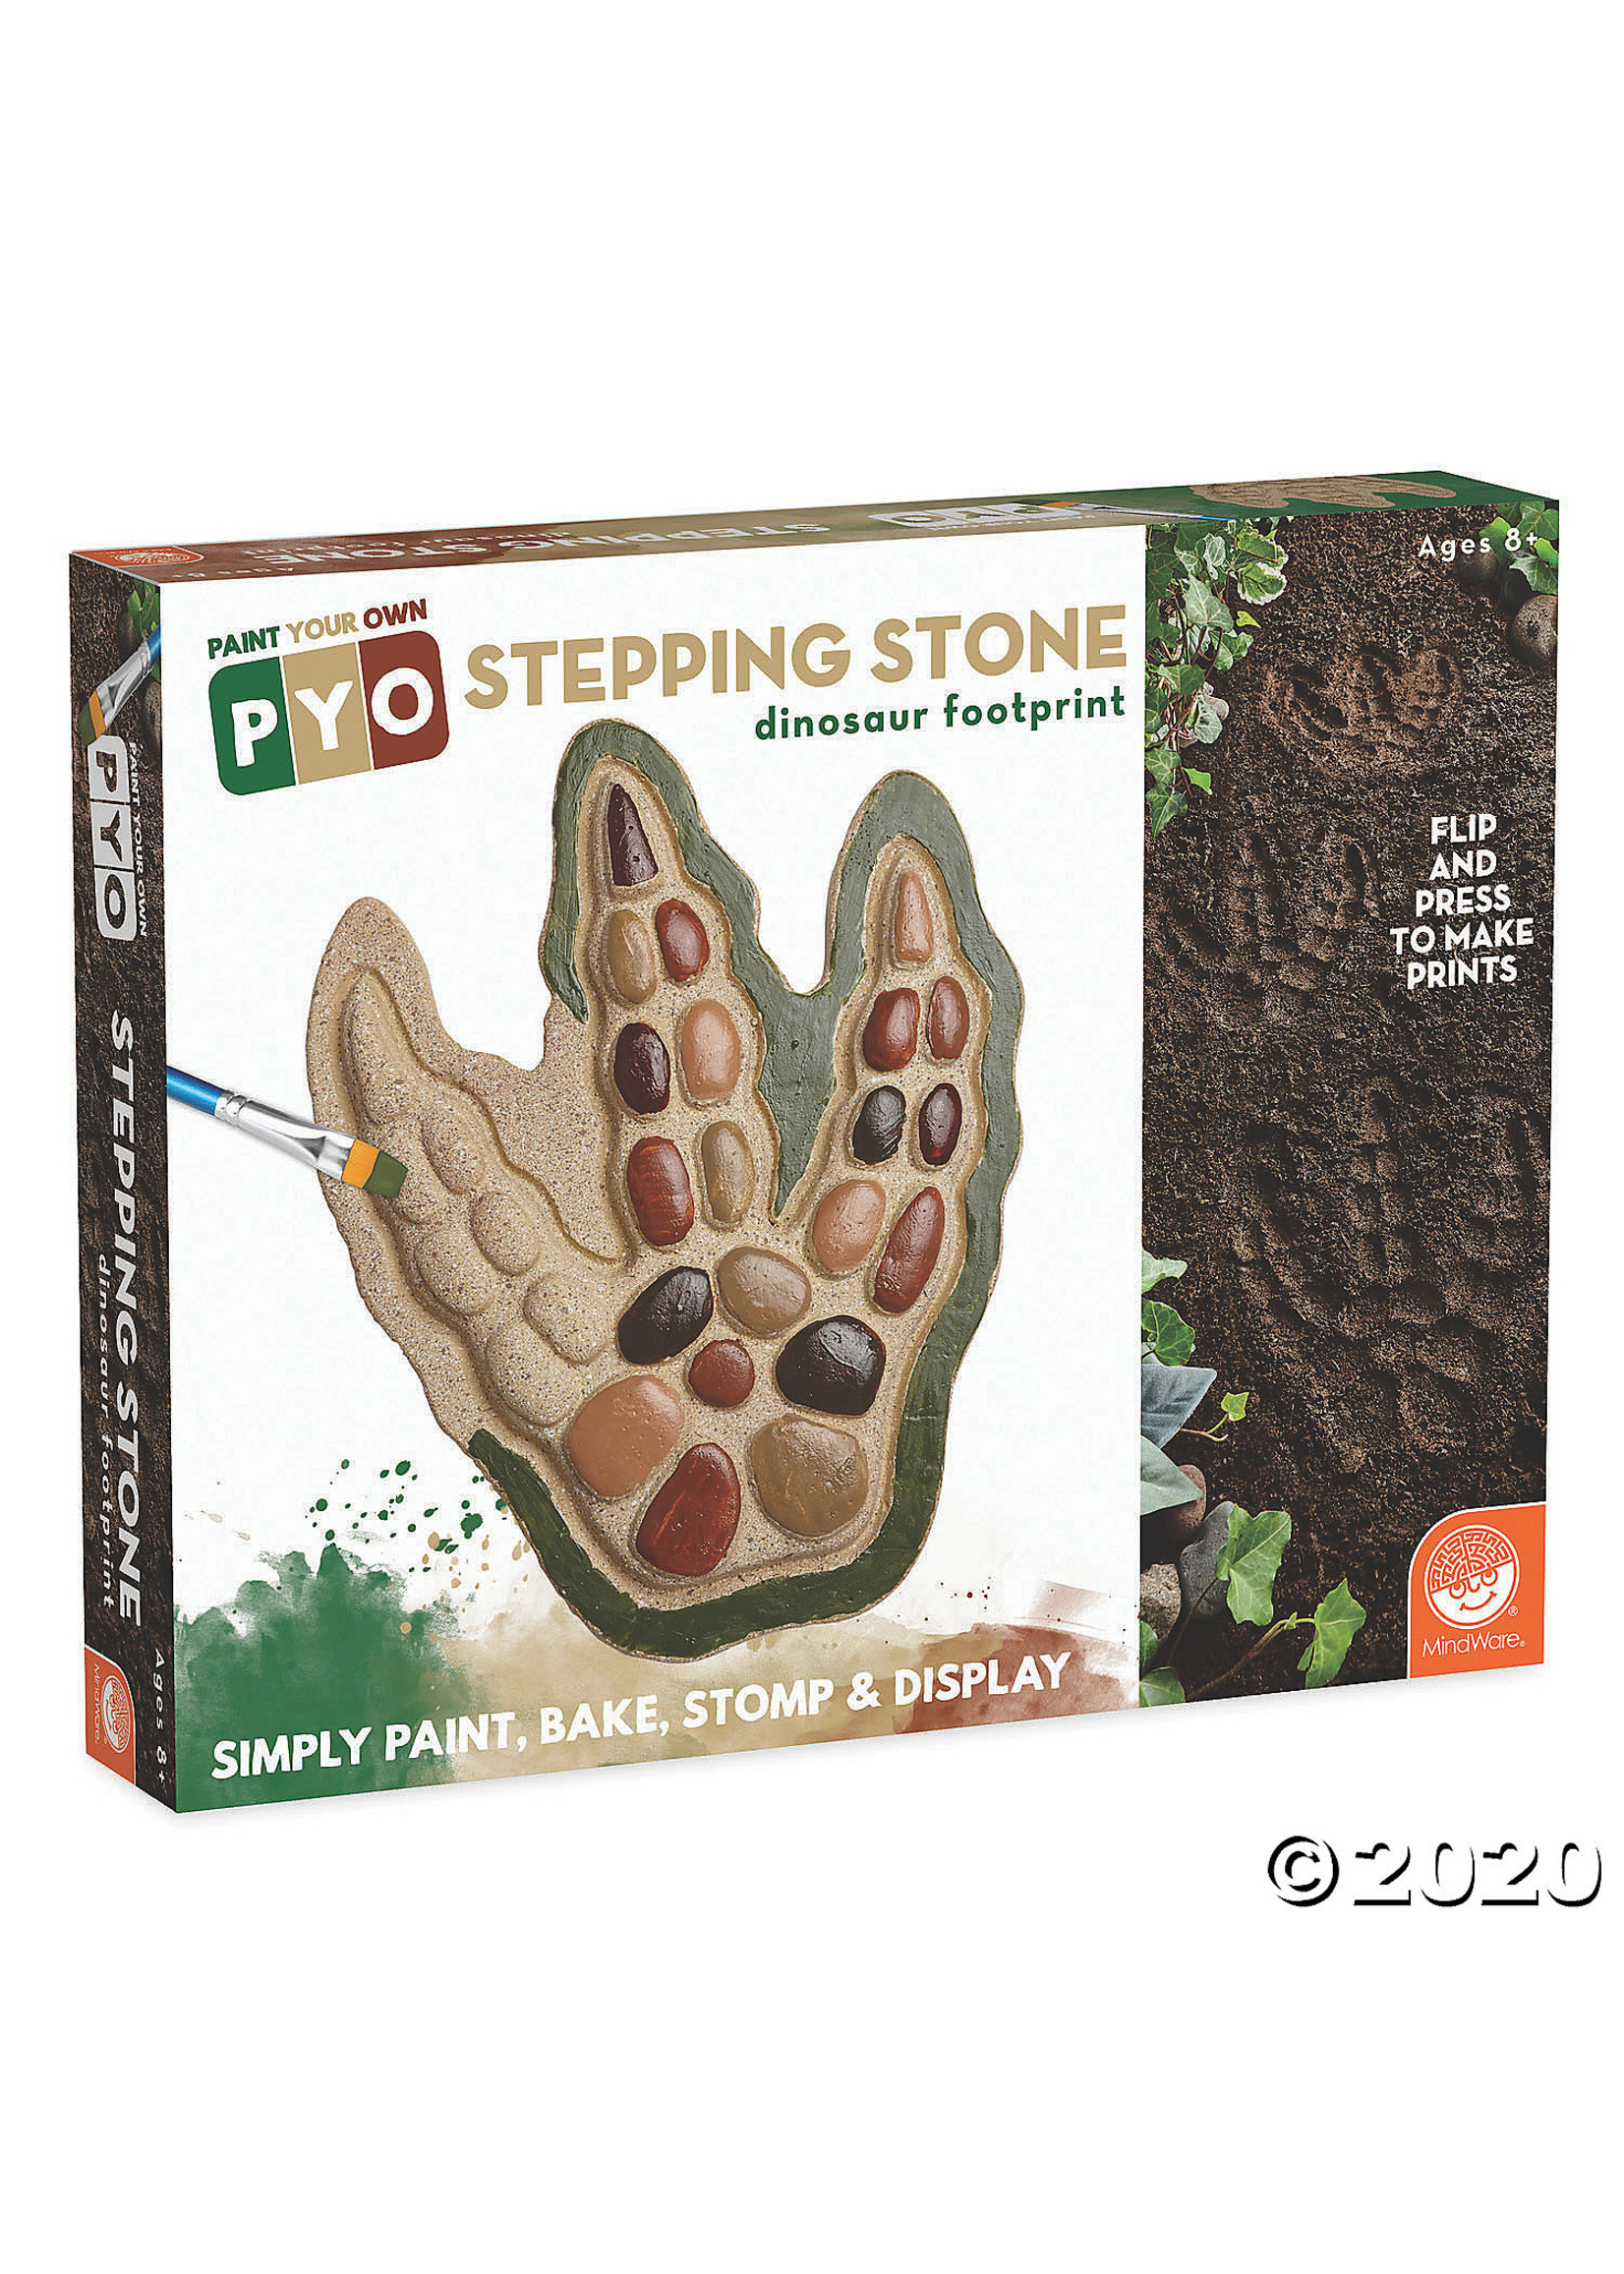 Mindware Paint Your Own: Dinosaur Footprint Stepping Stone